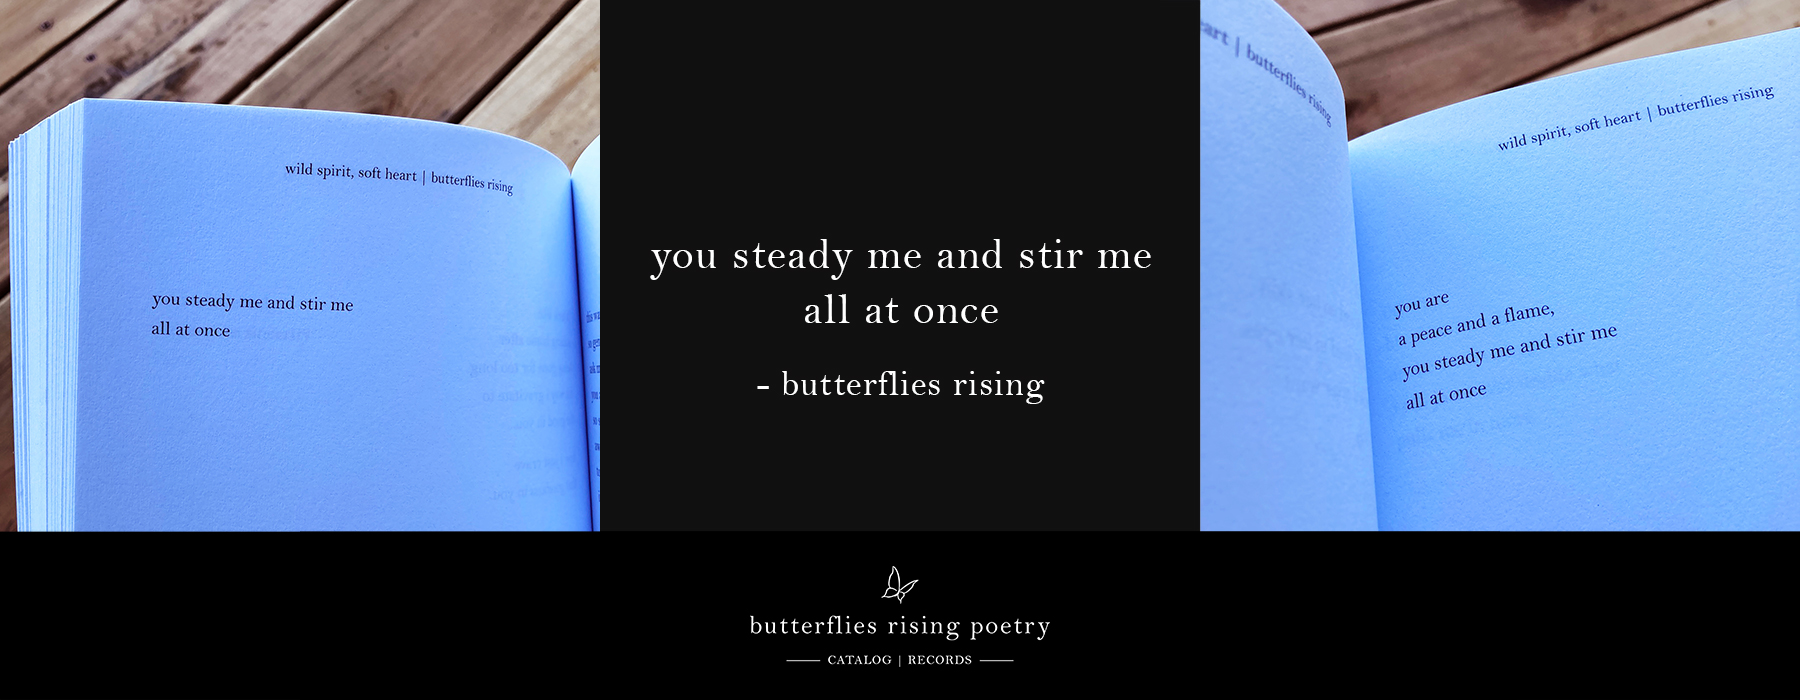 you steady me and stir me all at once - butterflies rising poem series